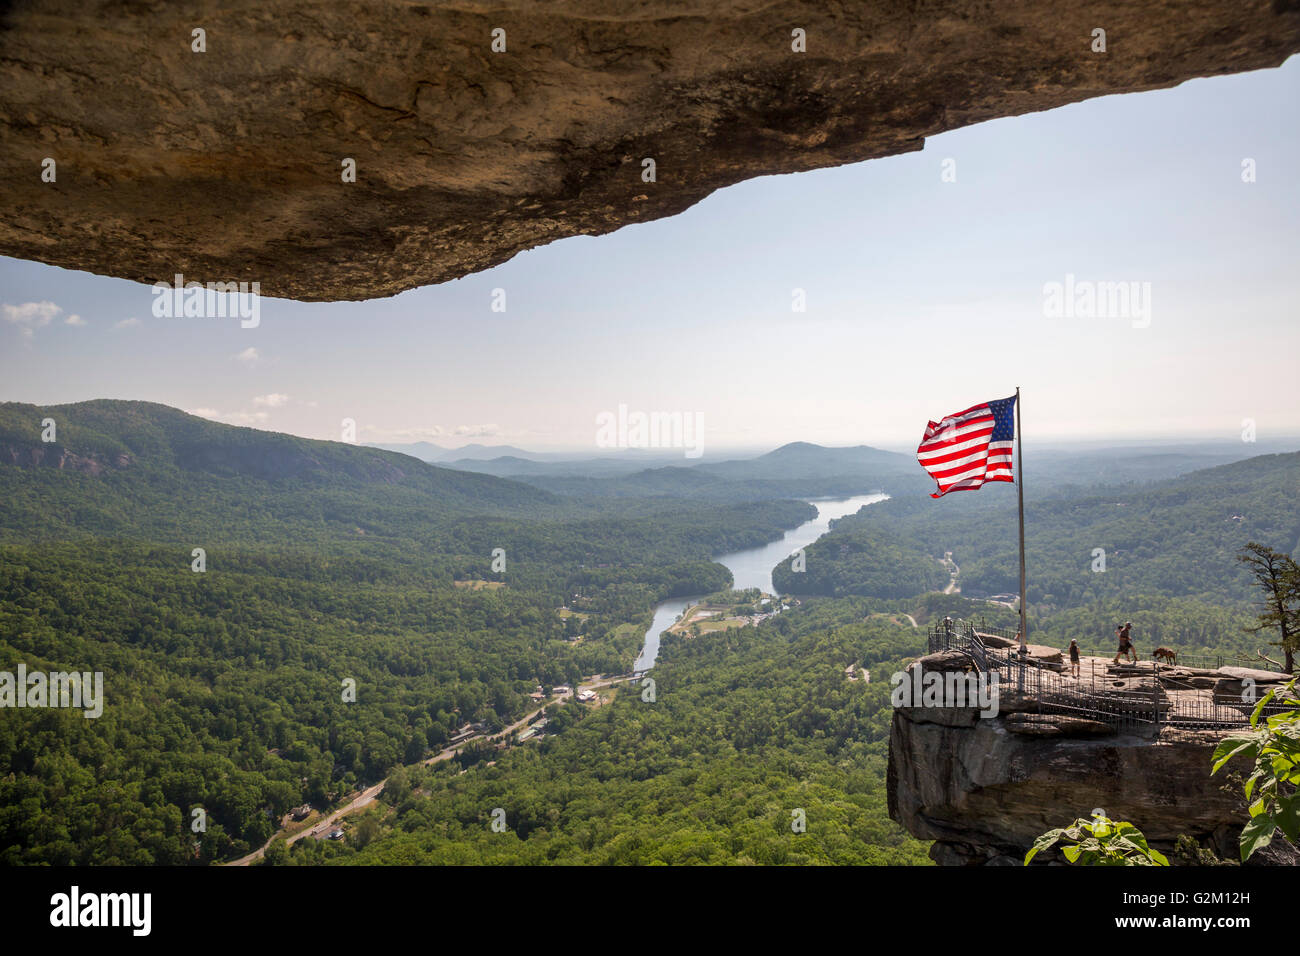 Chimney Rock, North Carolina - Chimney Rock State Park, a tourist attraction featuring a 535-million-year-old rock spire. Stock Photo